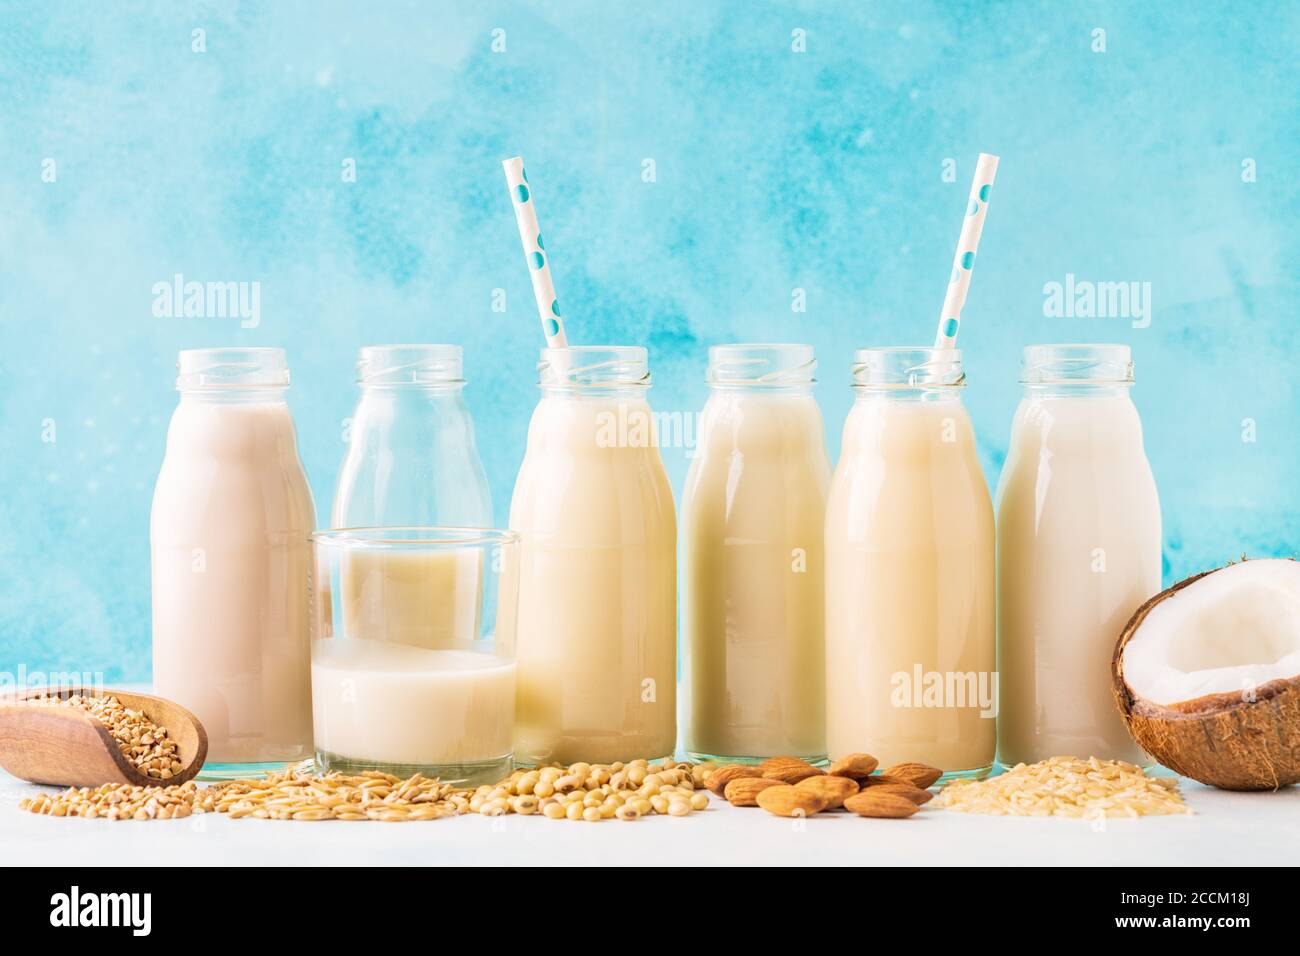 A bottles of alternative  milk and ingredients for cooking. Stock Photo